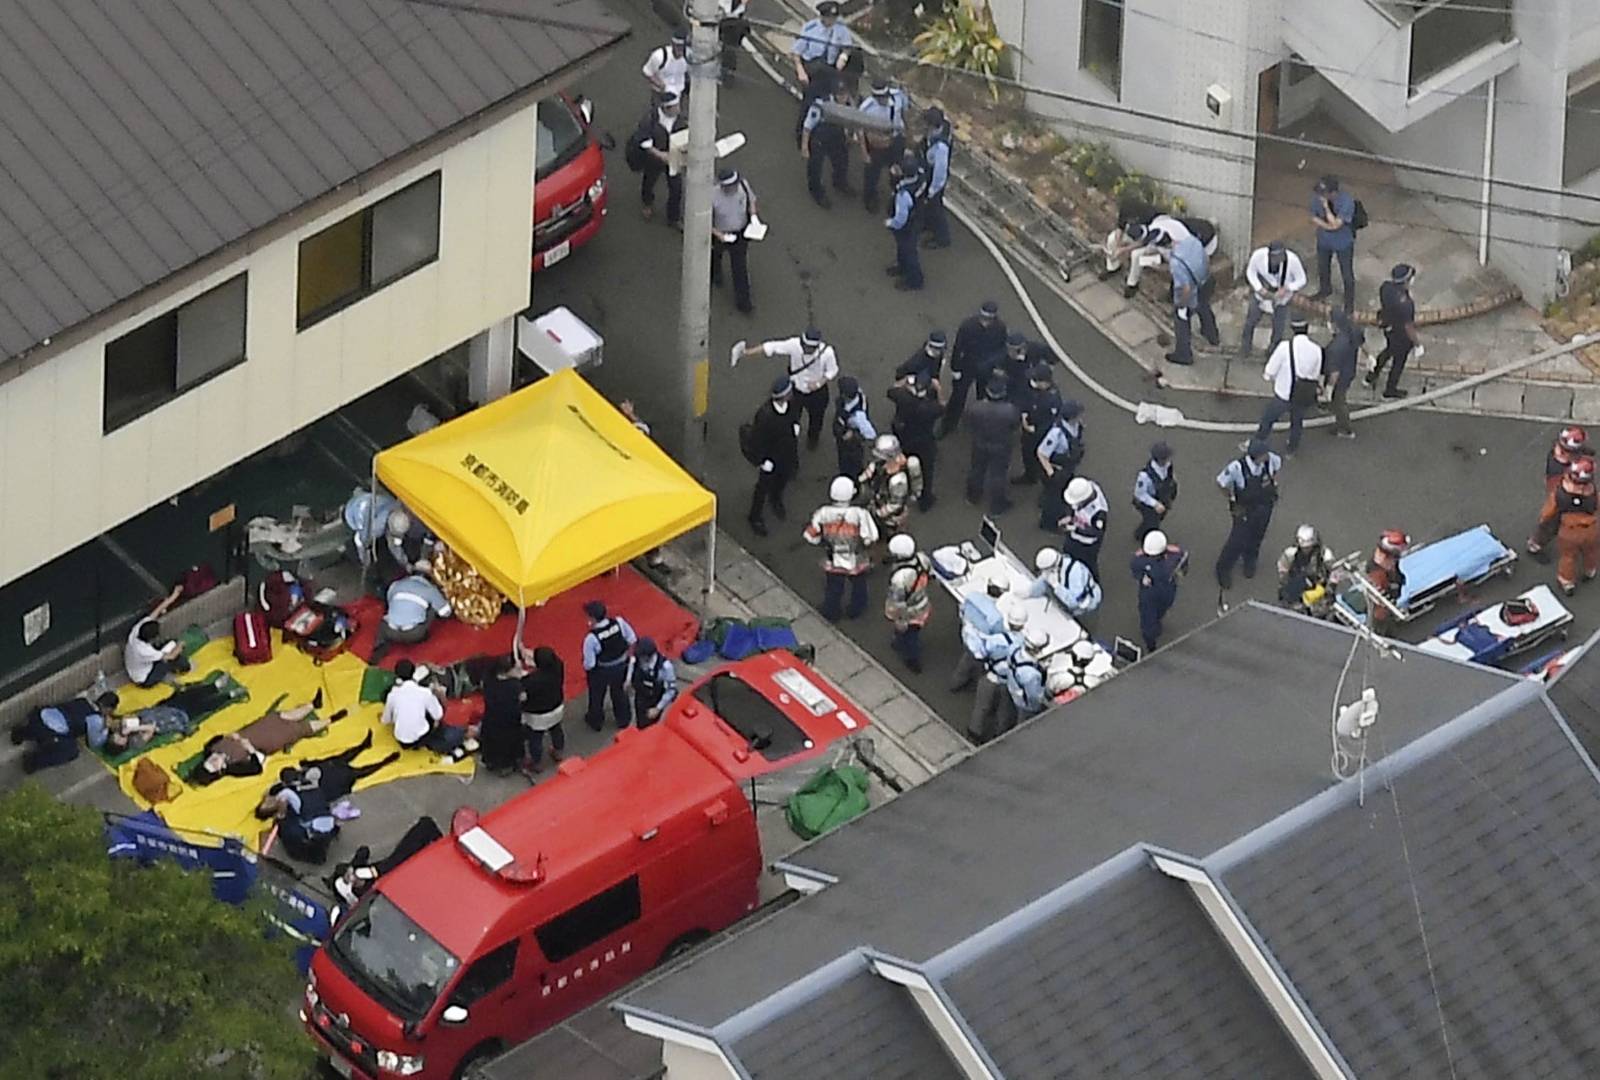 Rescue workers carry injured people from the three-story Kyoto Animation building which was torched in Kyoto